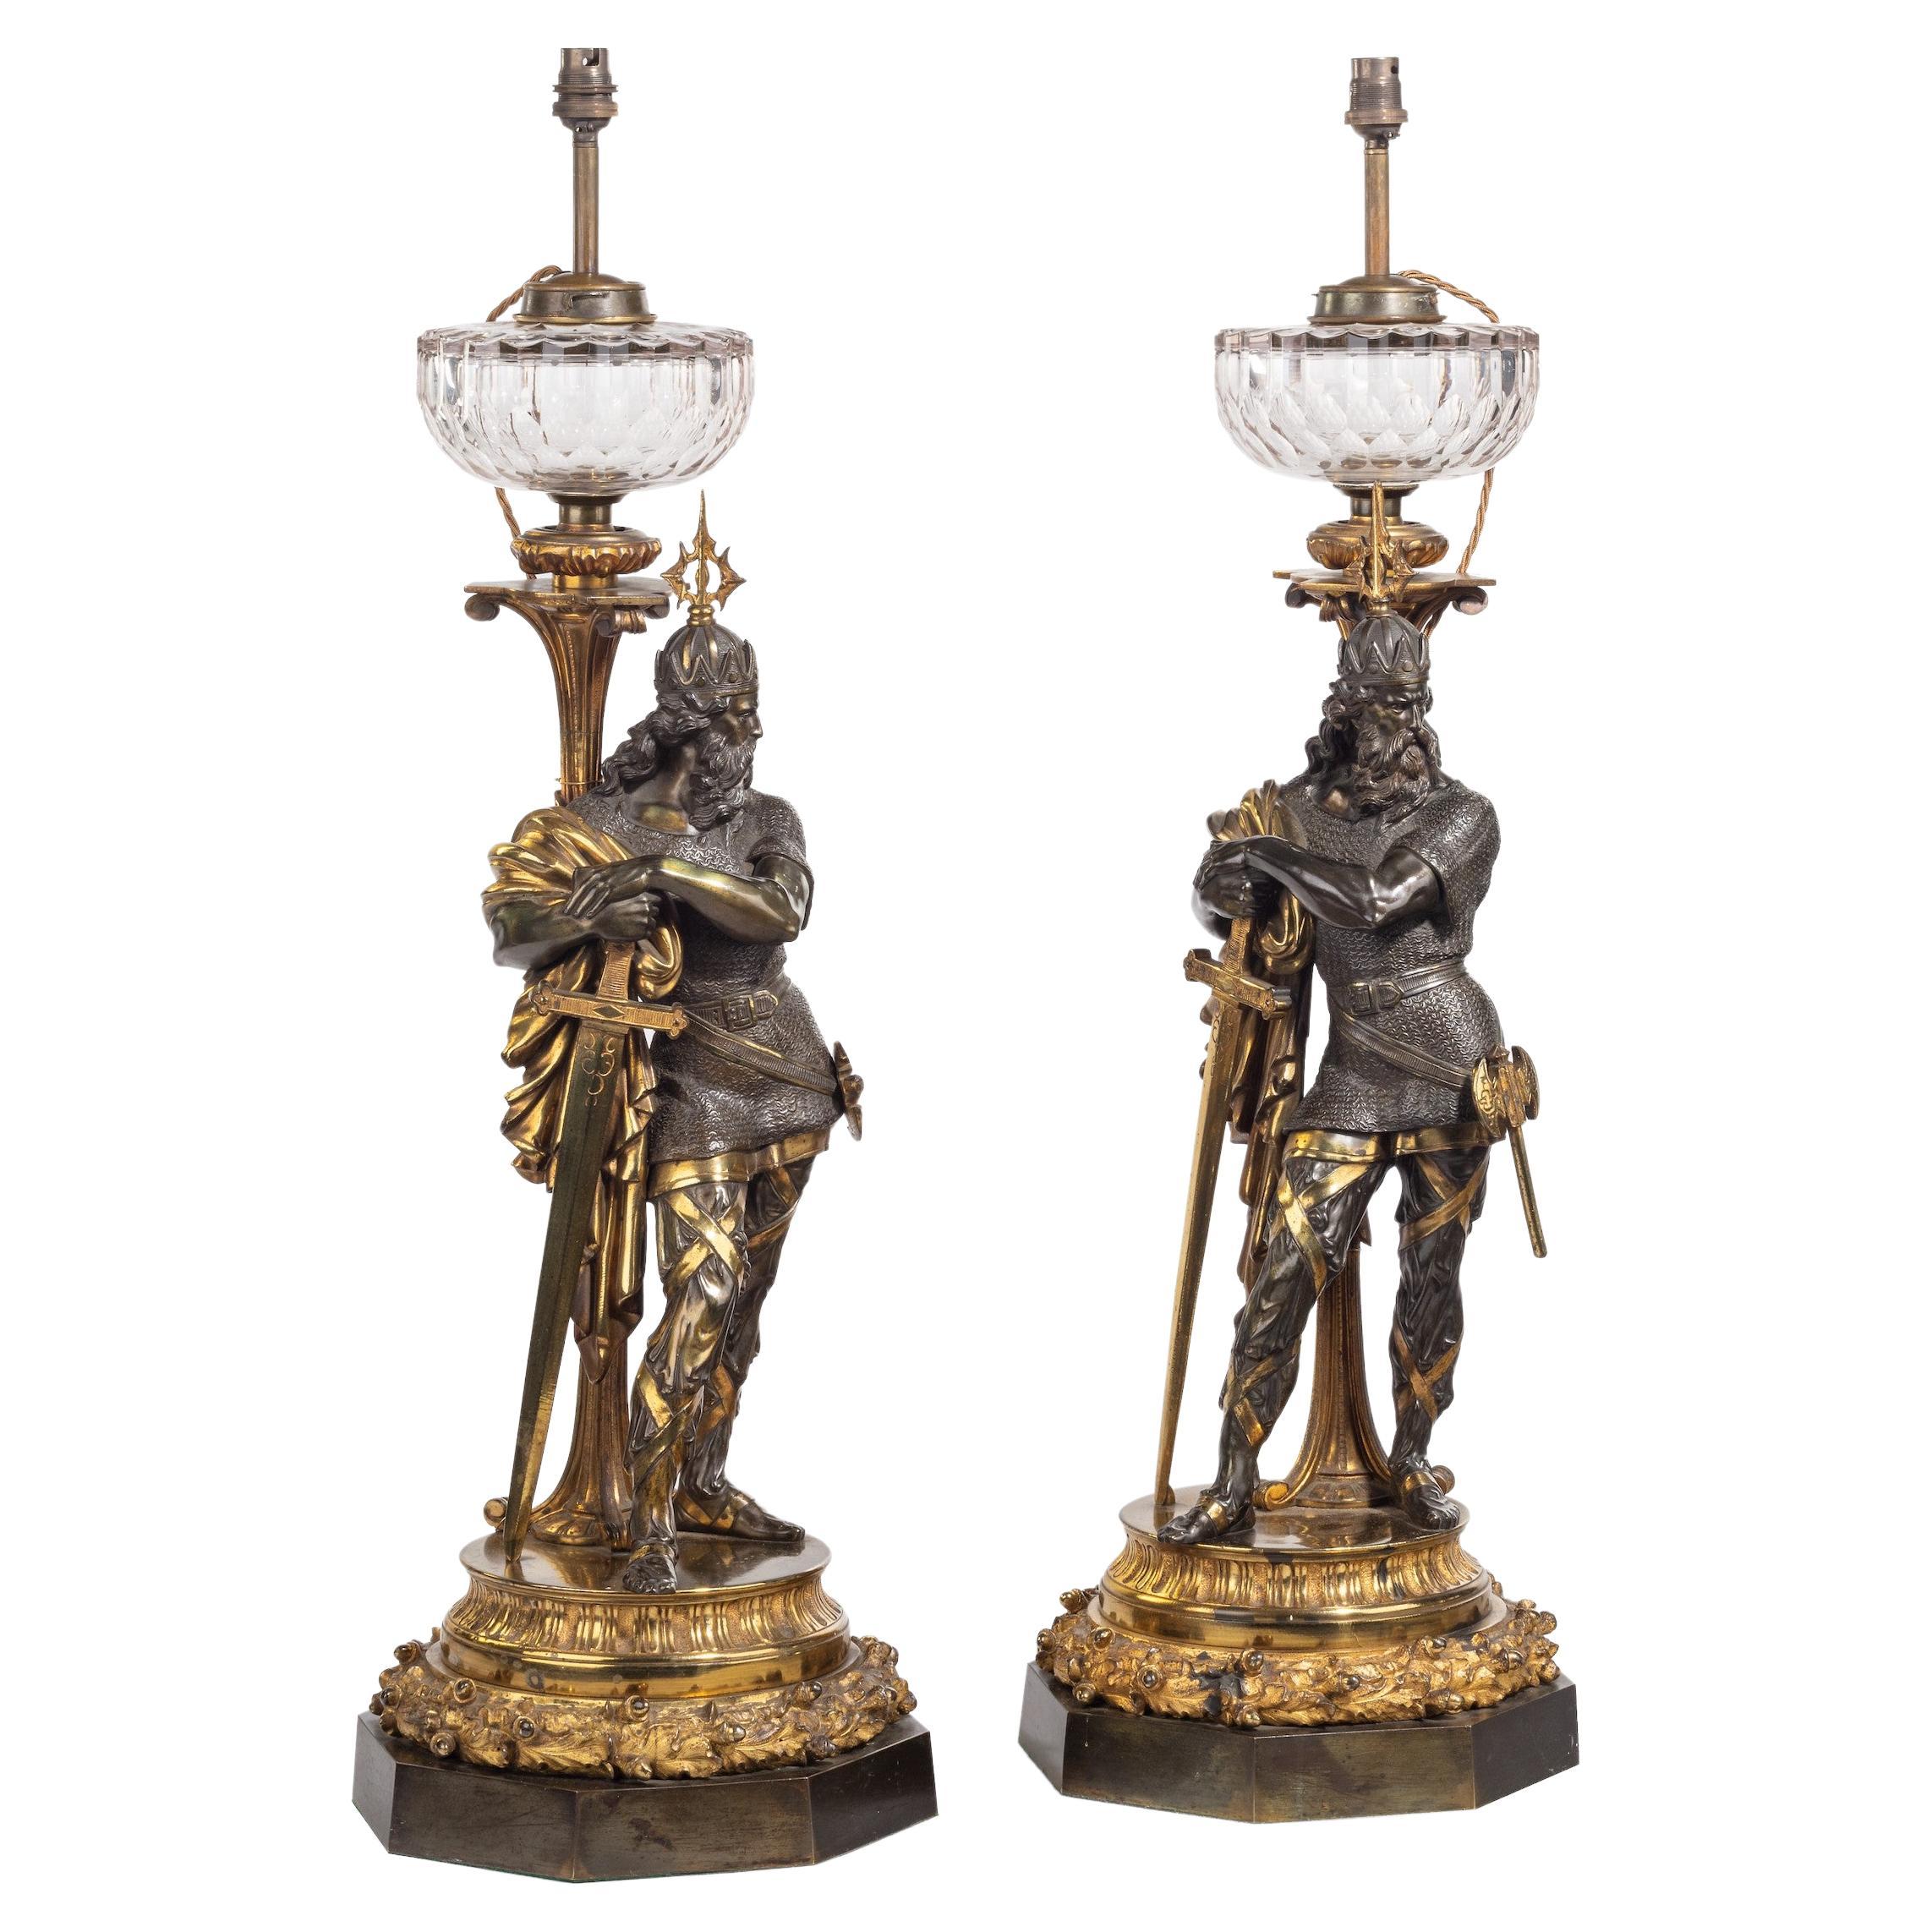 An impressive pair of patinated and gilt bronze figural lamps

Cast and hand-chased from patinated and fire-gilt bronze, the lamps modelled with standing figures of Medieval kings, in contrapposto, the crowned warriors wearing chainmail, resting